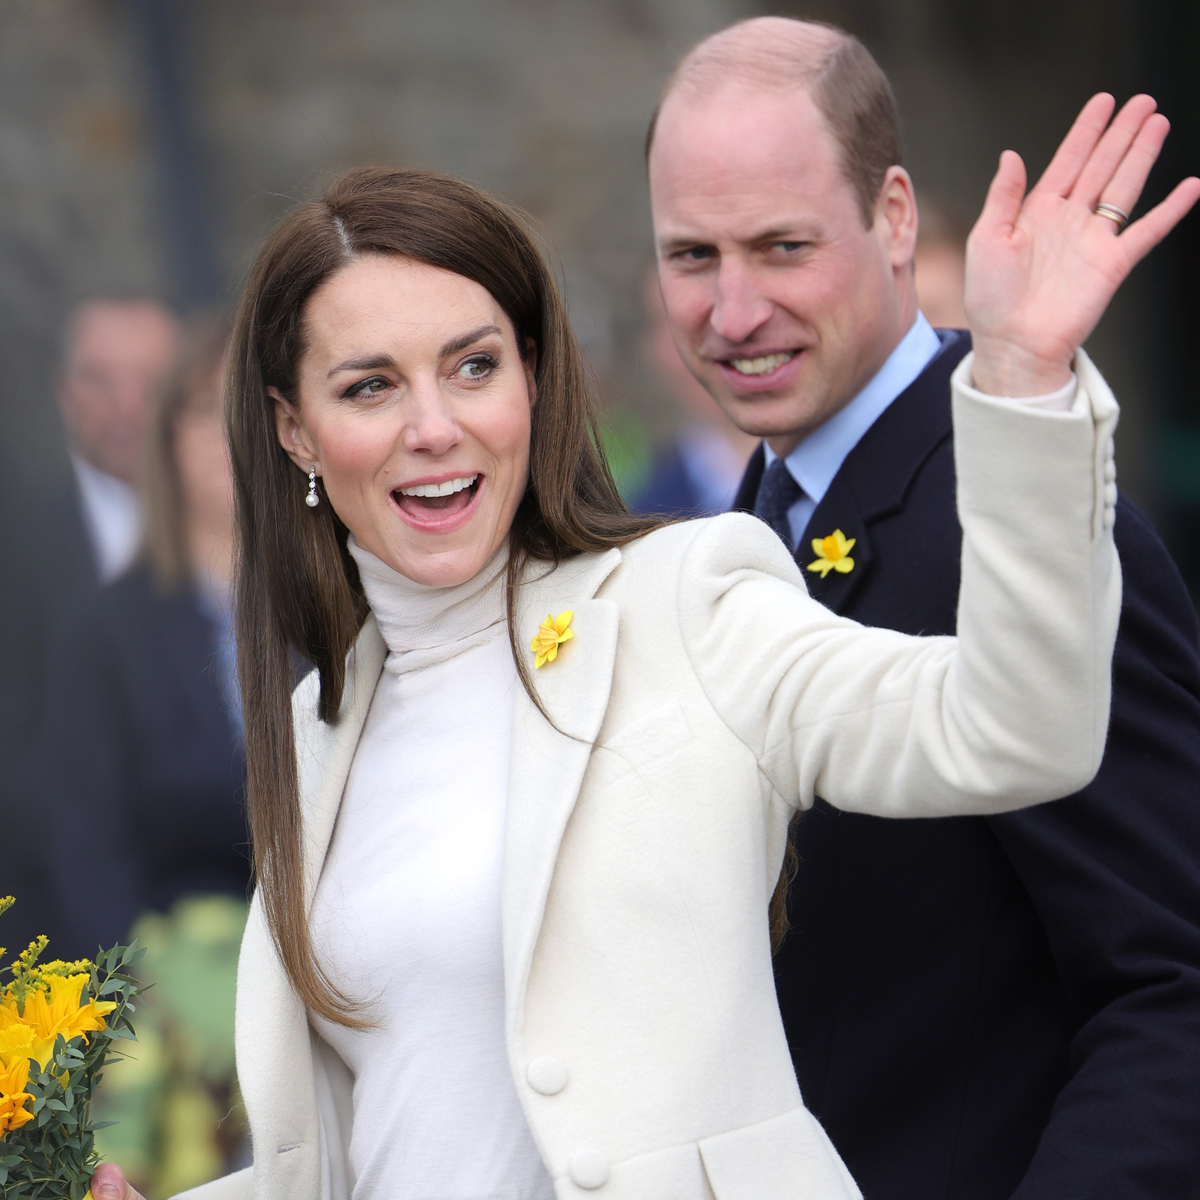 Prince William & Kate Middleton's New PR Style May Be at Odds With King  Charles III's 'Formal' Way of Operating